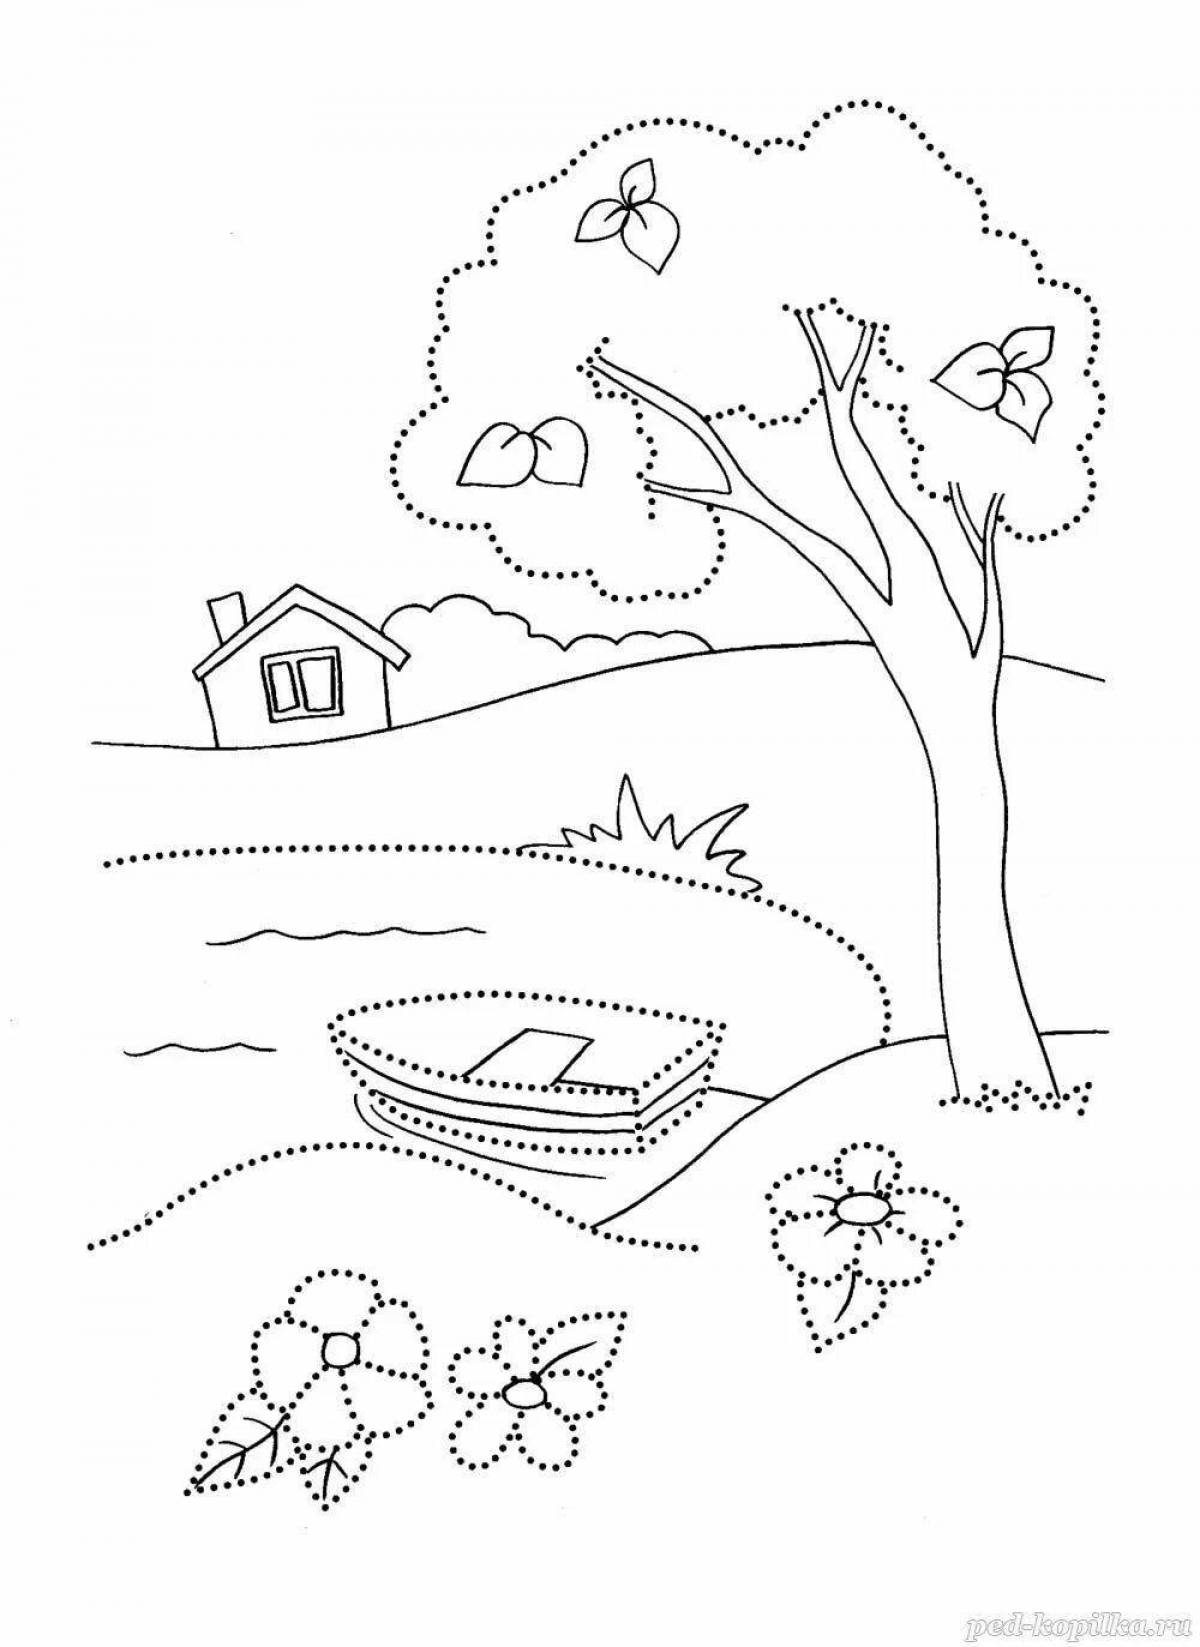 Coloring page charming summer nature